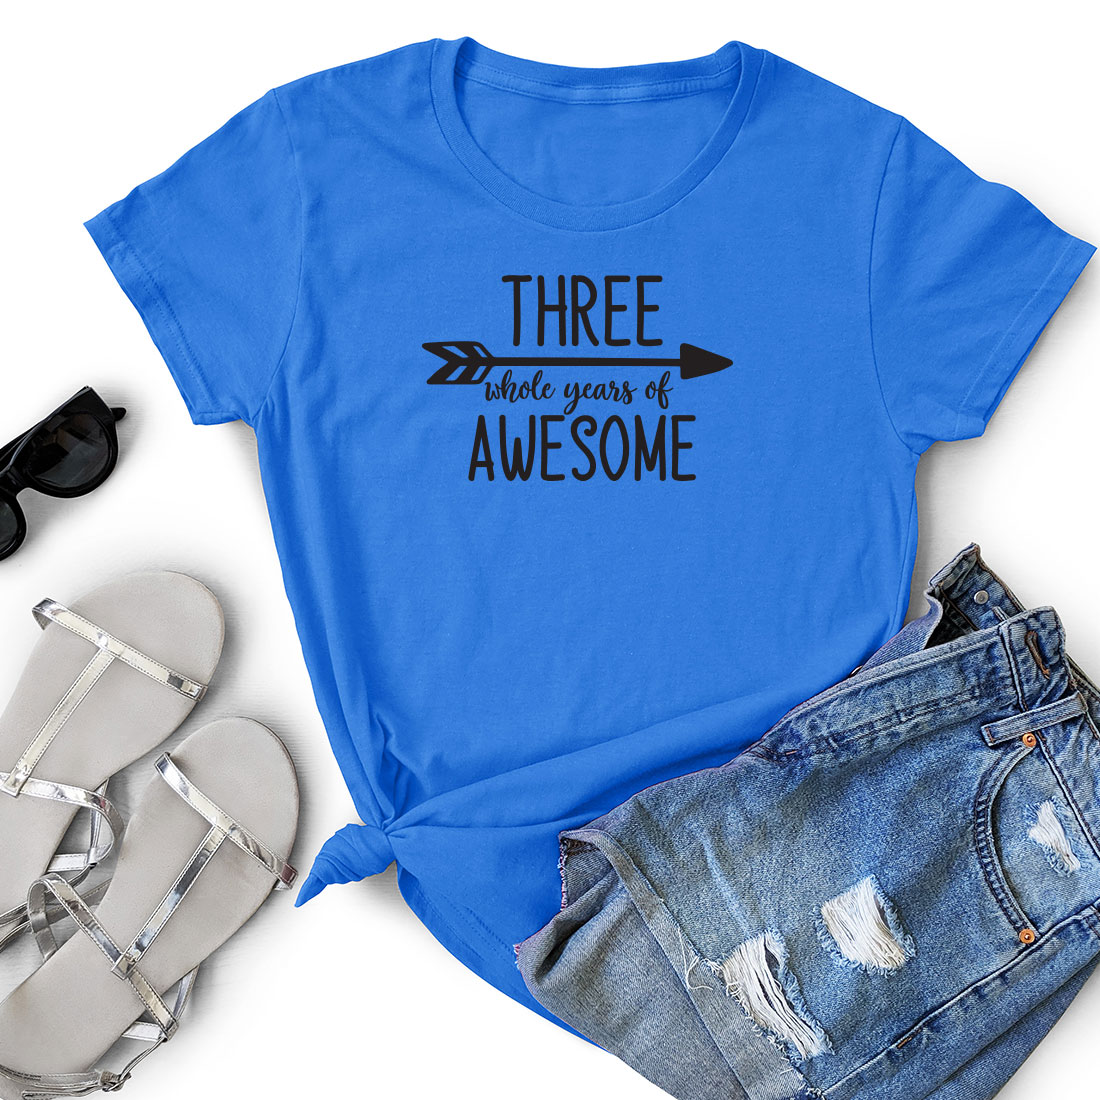 T - shirt that says three before years of awesome.